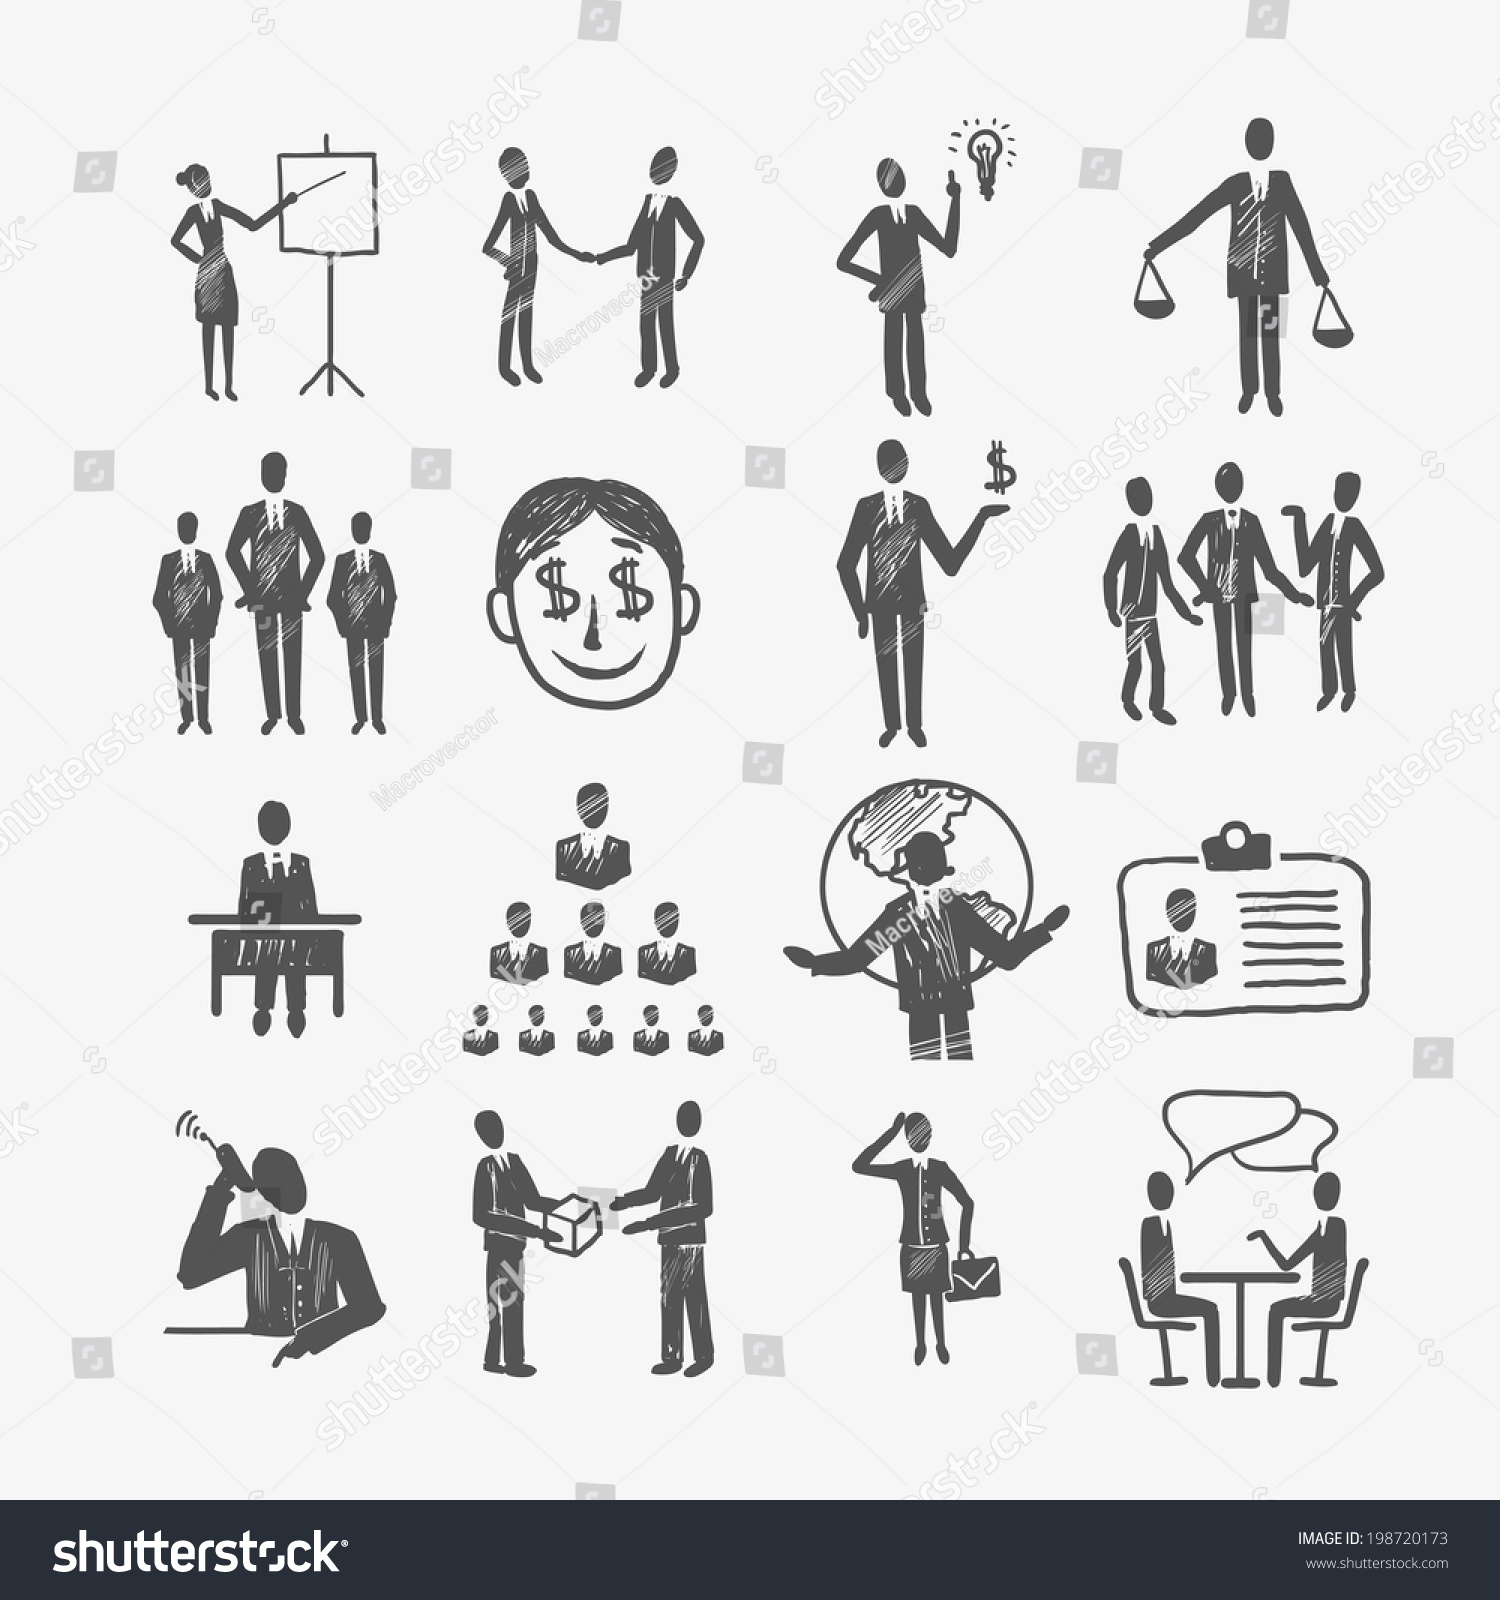 Sketch Business Organization Management Structure Meeting People Icon